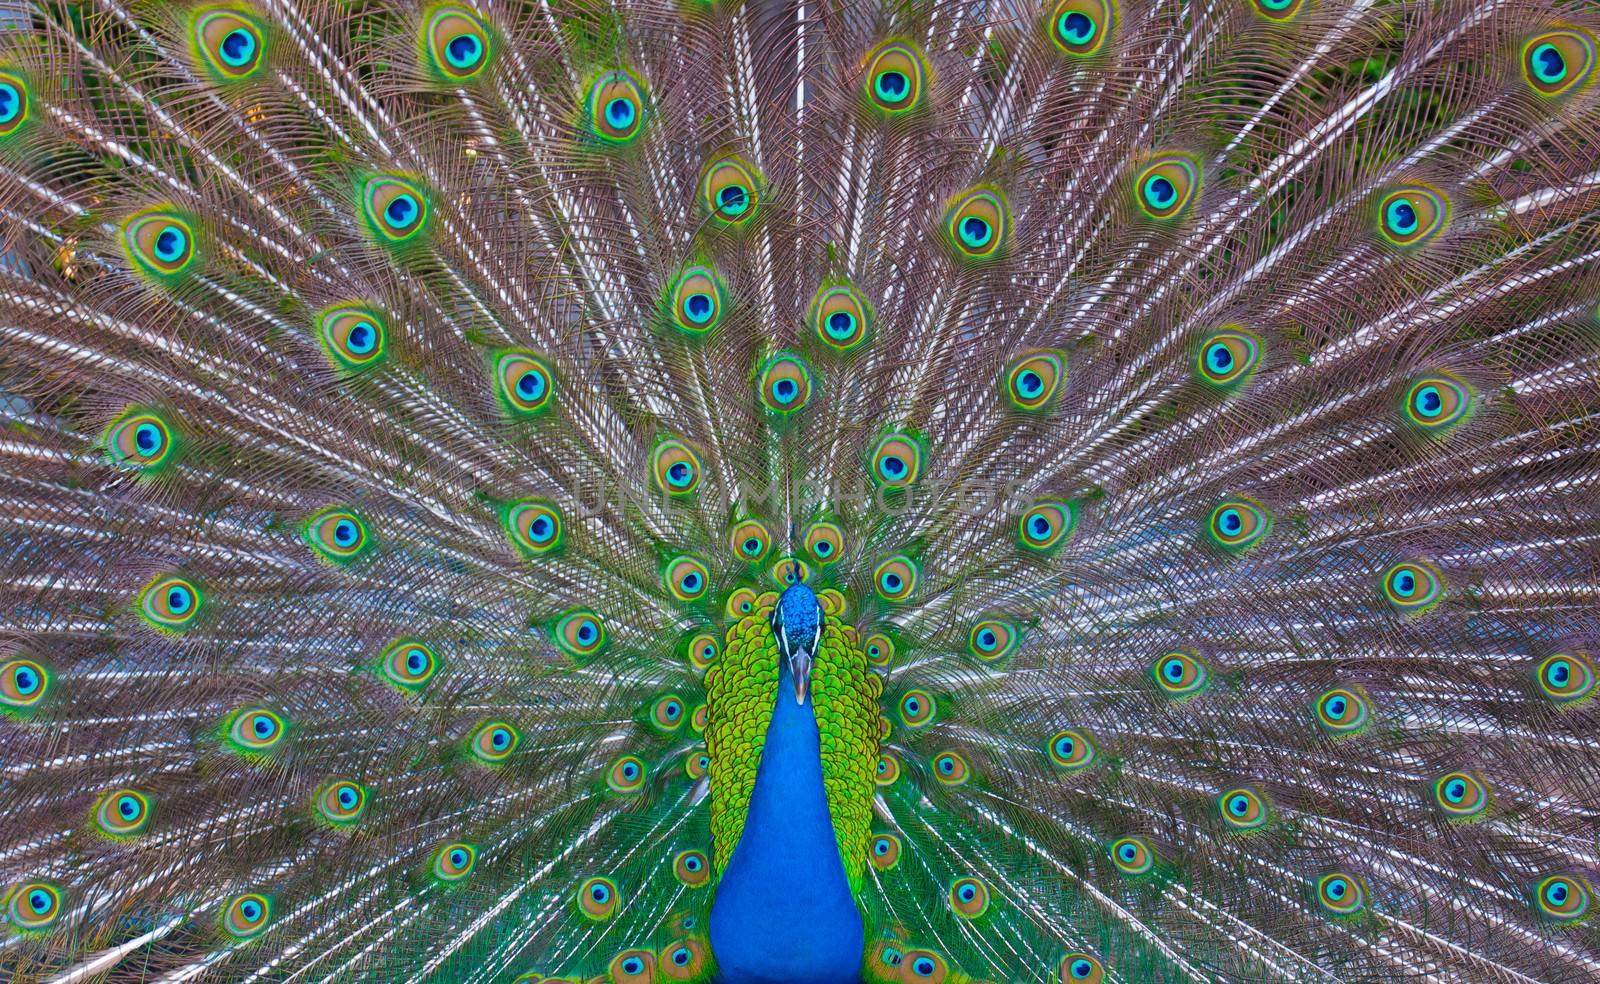 Peacock showing his majestic tail during the mating season.